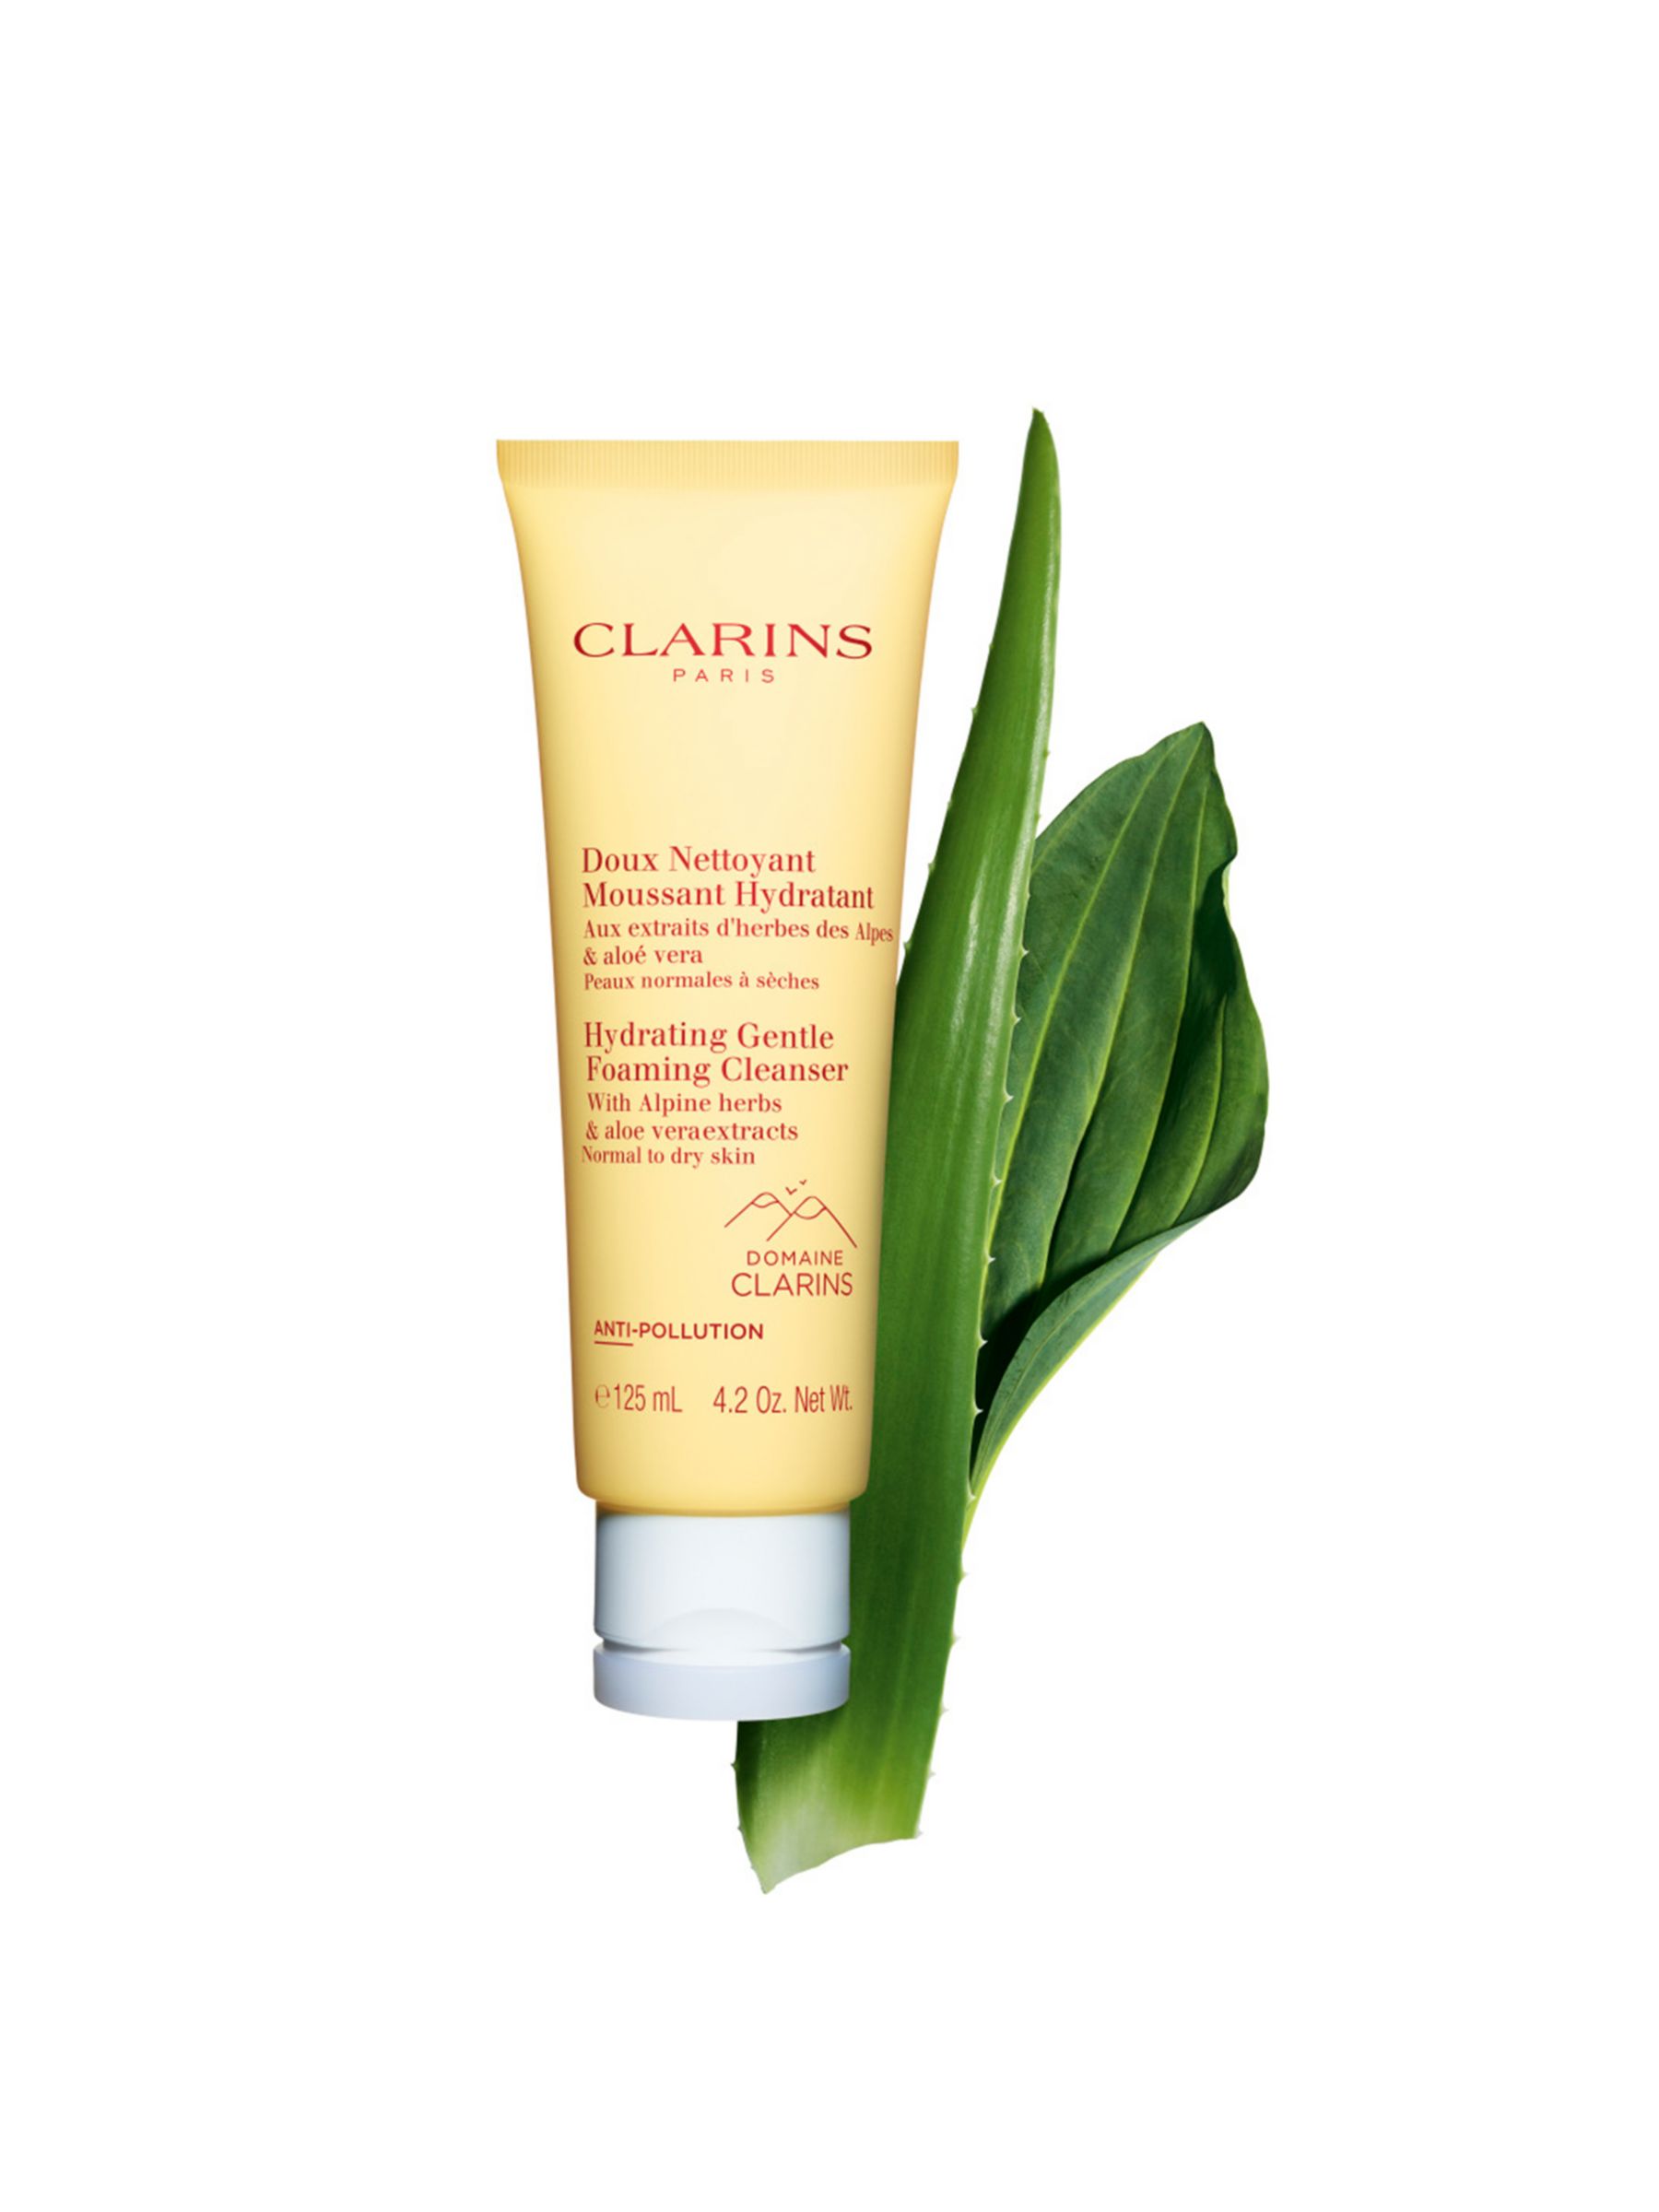 Clarins Hydrating Gentle Foaming Cleanser, 125ml 2